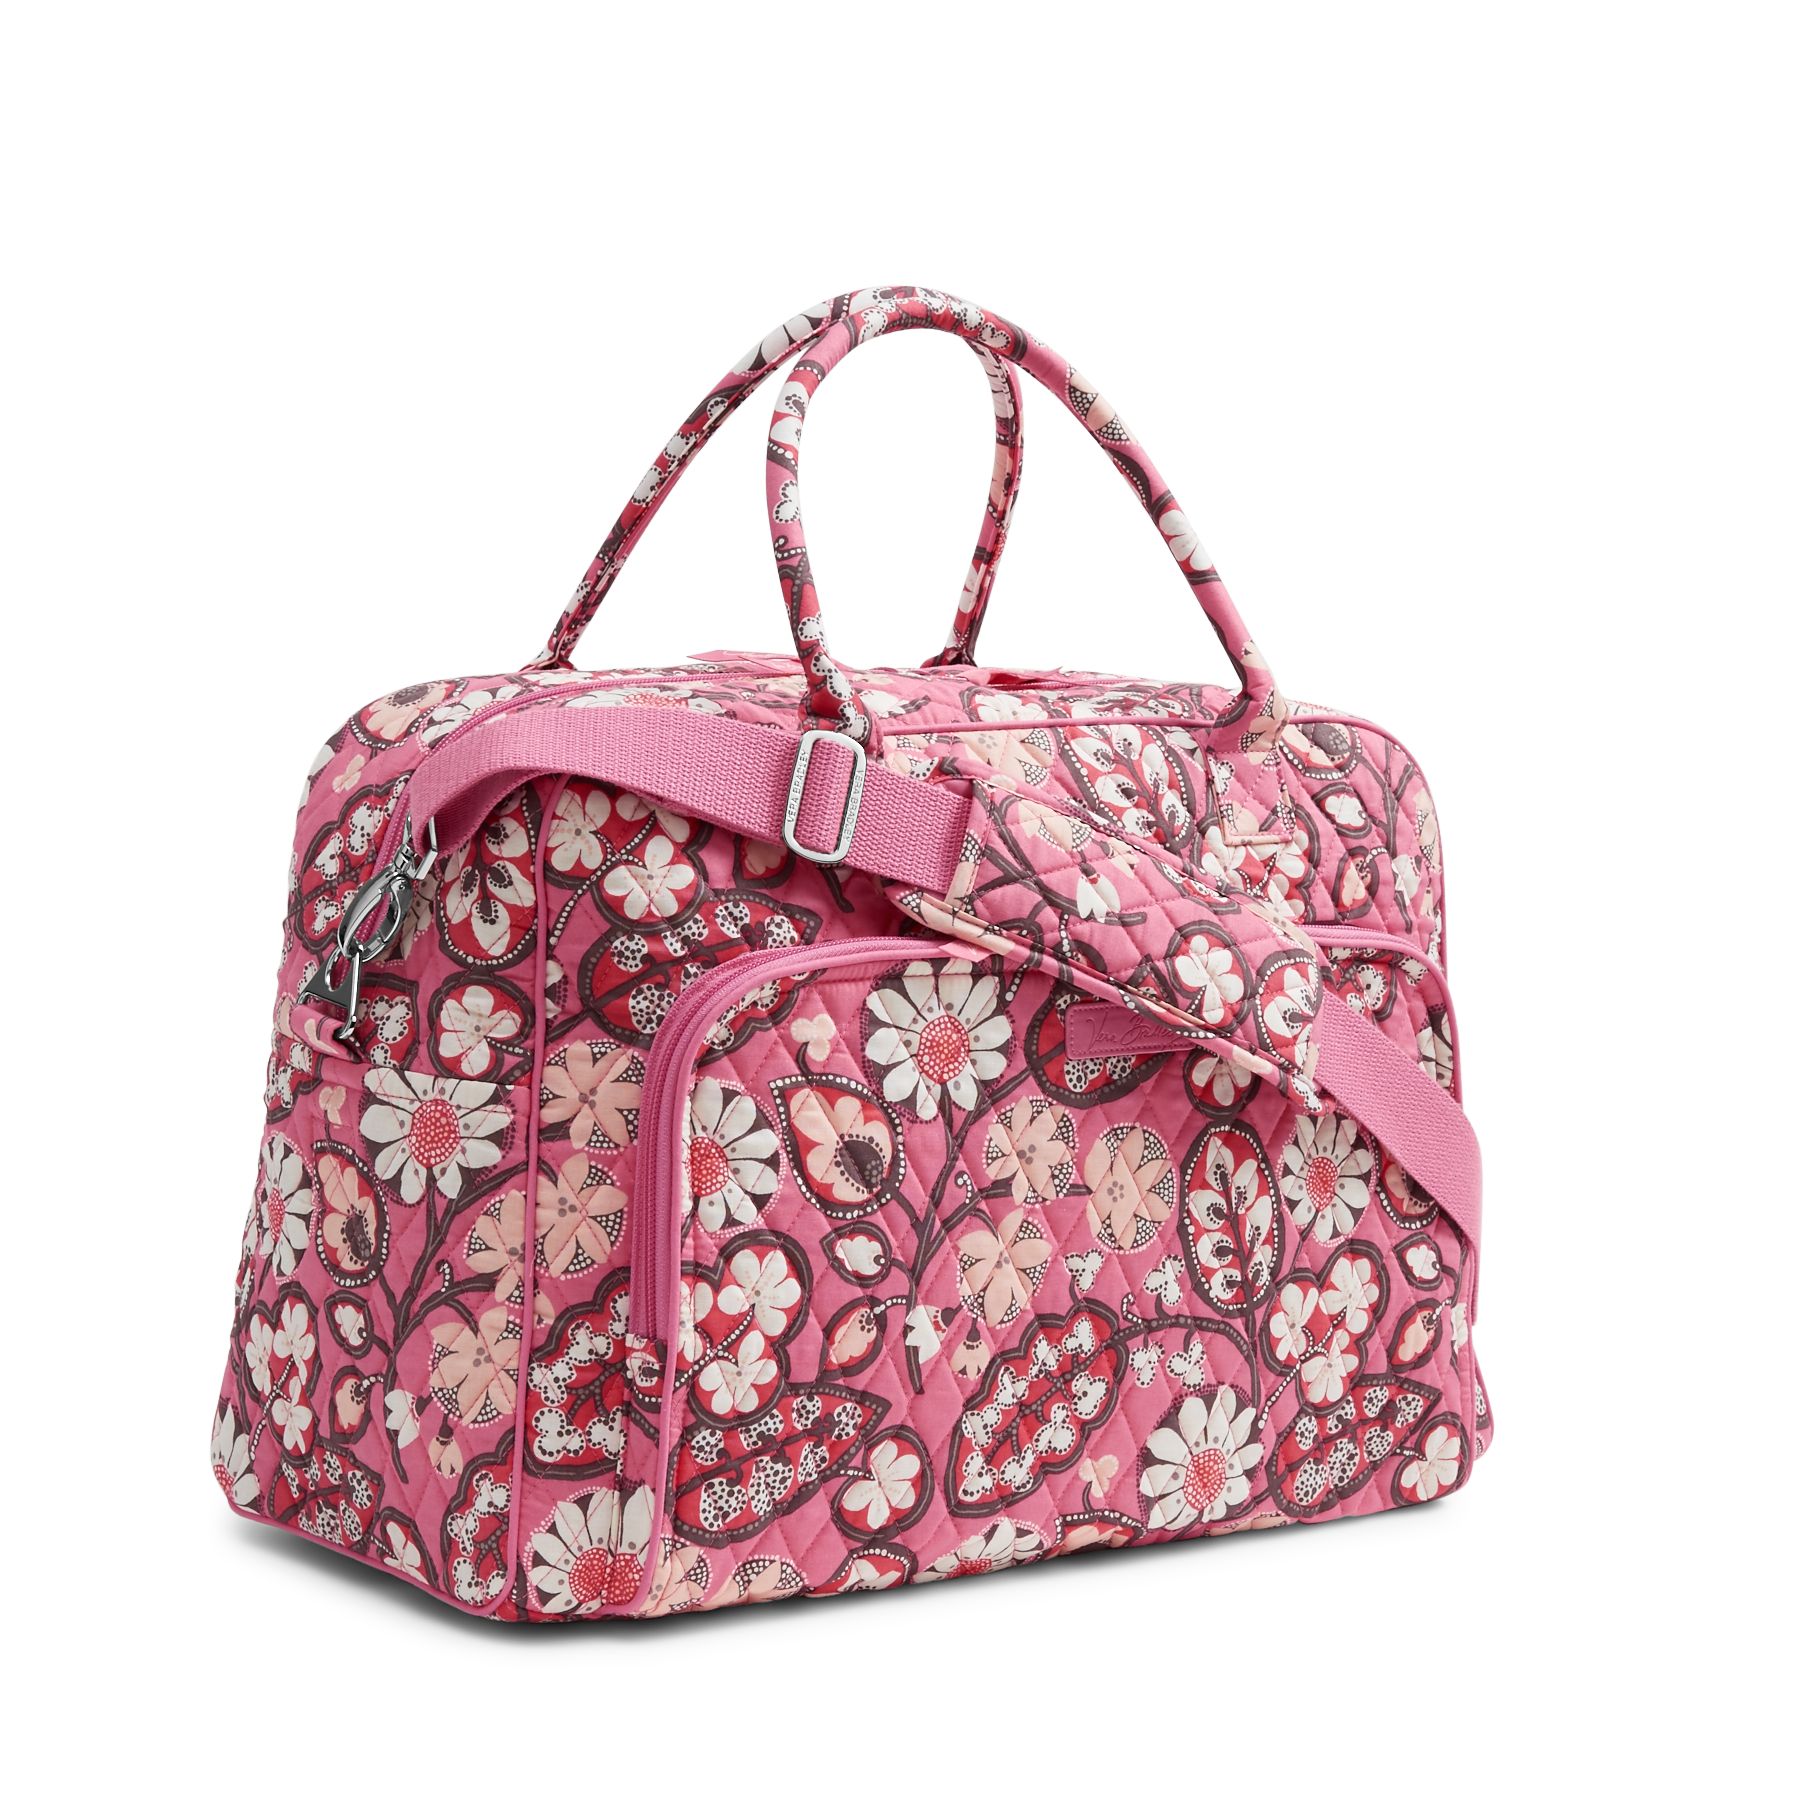 Vera bradley Coupon Code: Holiday SALE  50% OFF SELECT COLORS